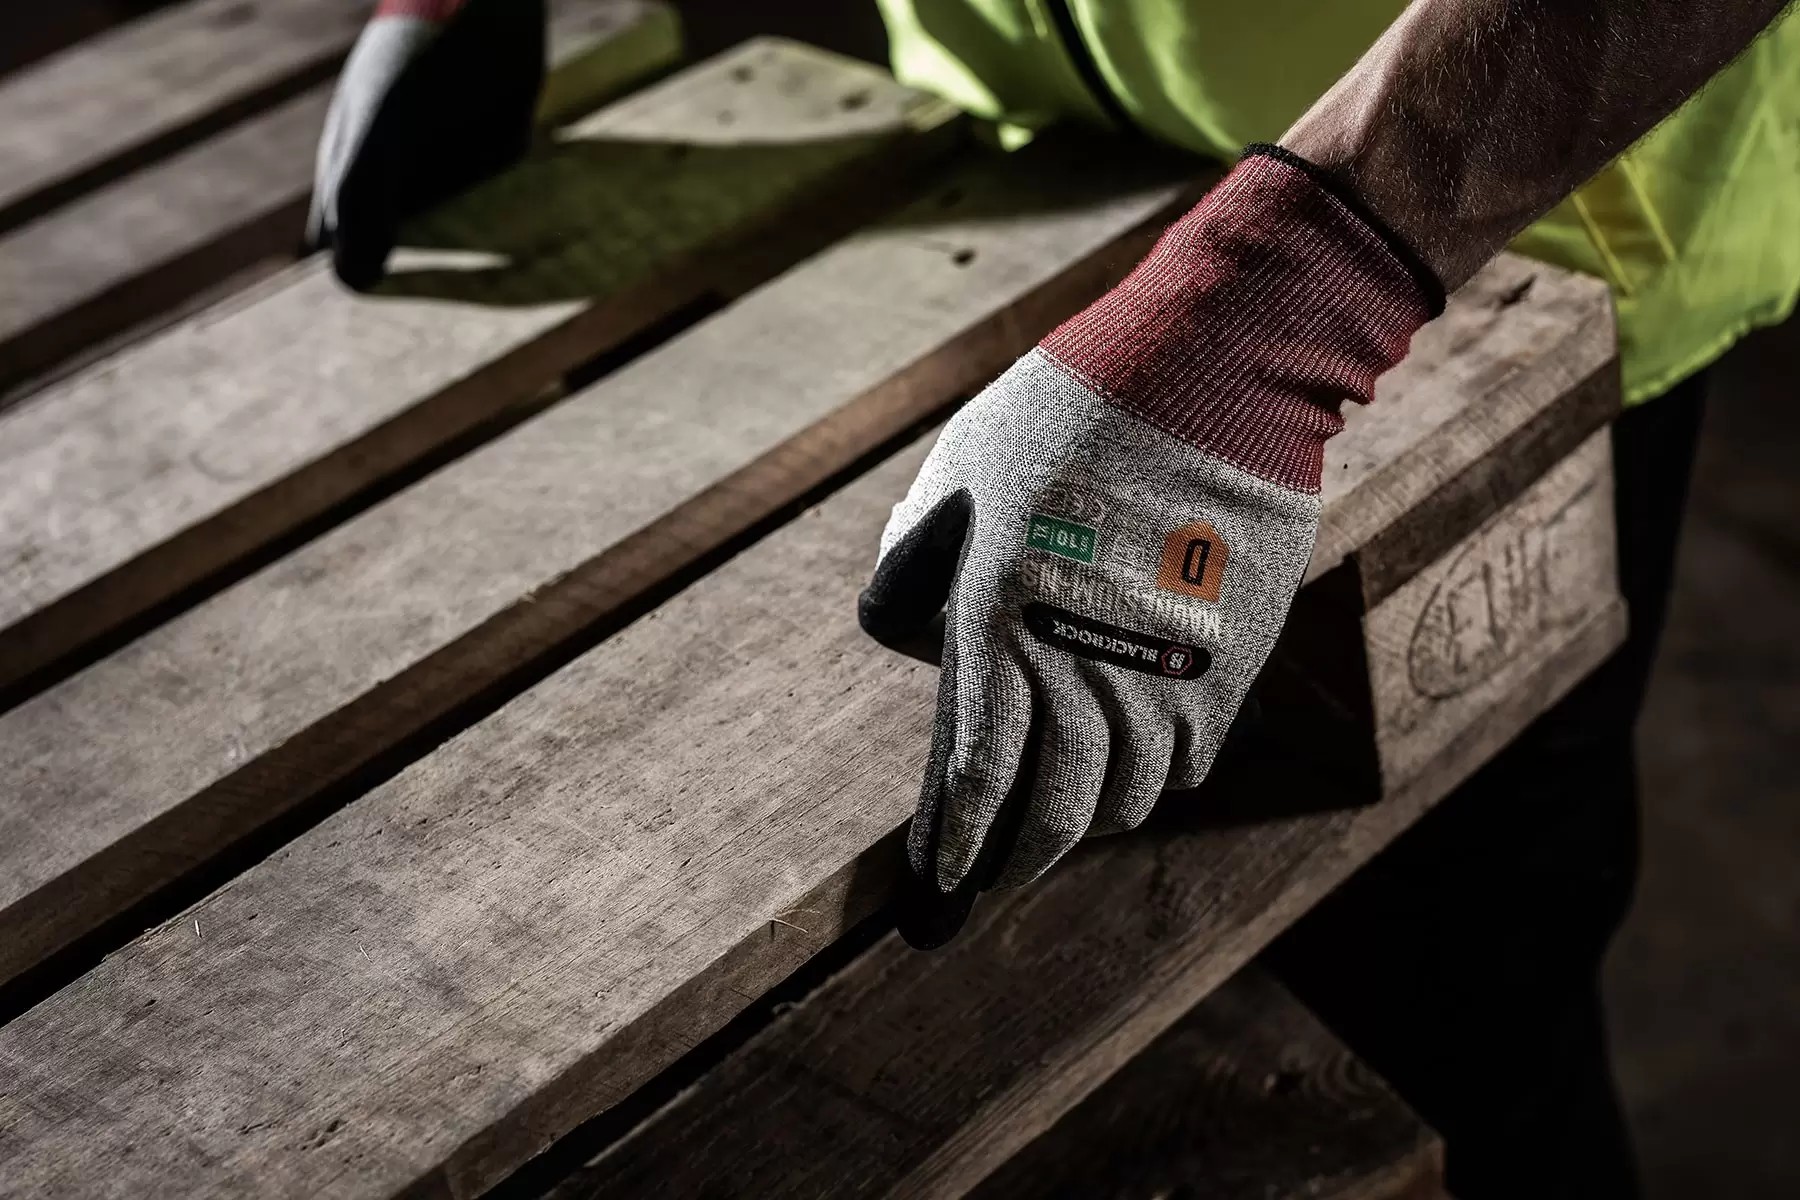 What are cut resistant gloves and how do they work?